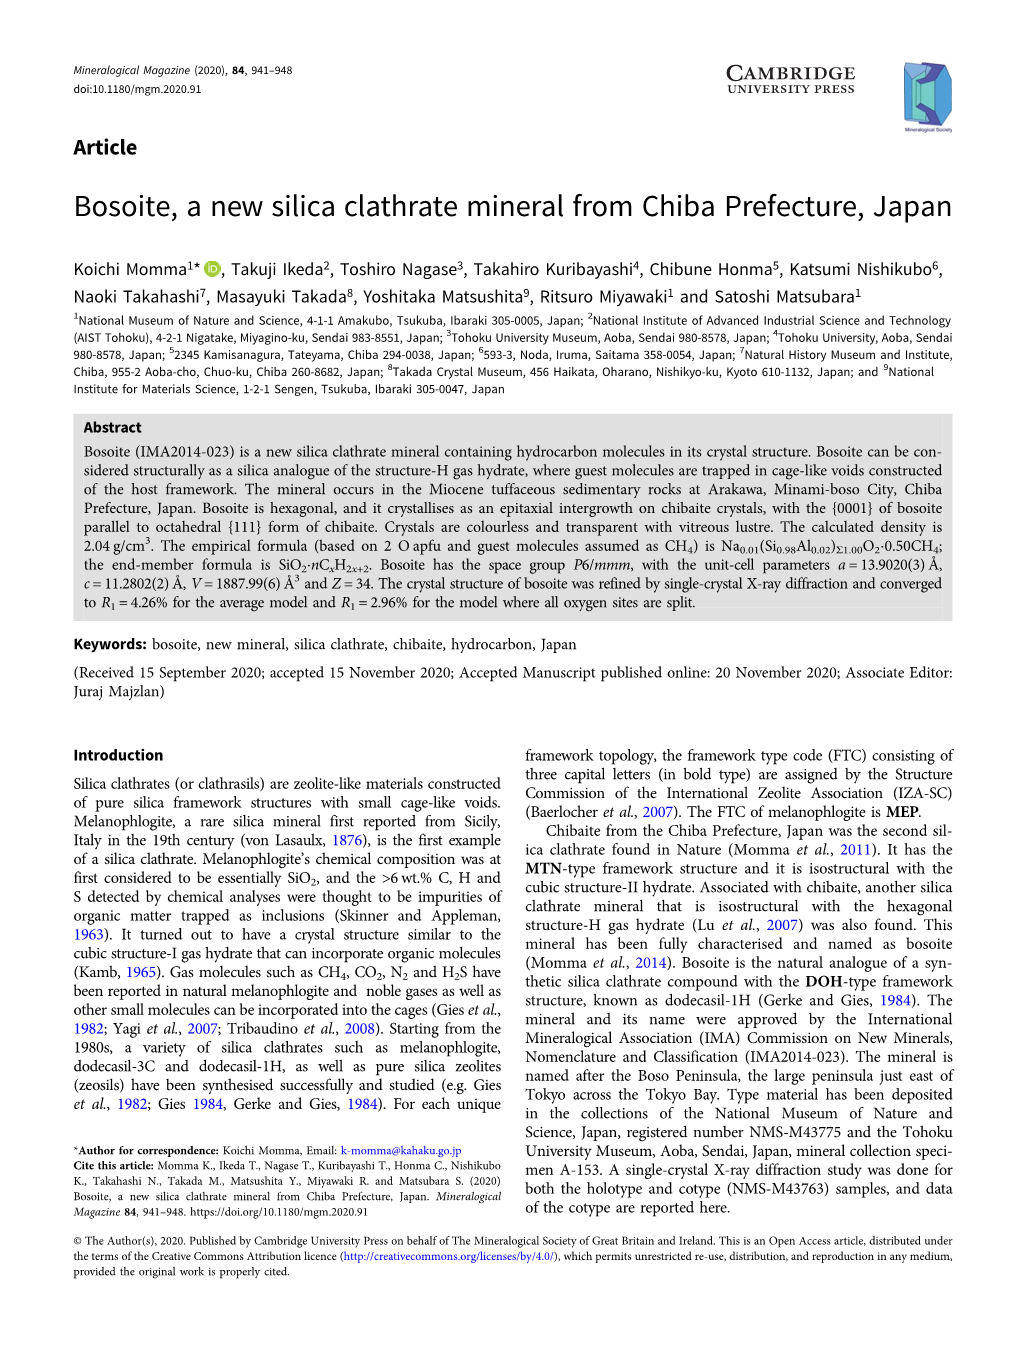 Bosoite, a New Silica Clathrate Mineral from Chiba Prefecture, Japan